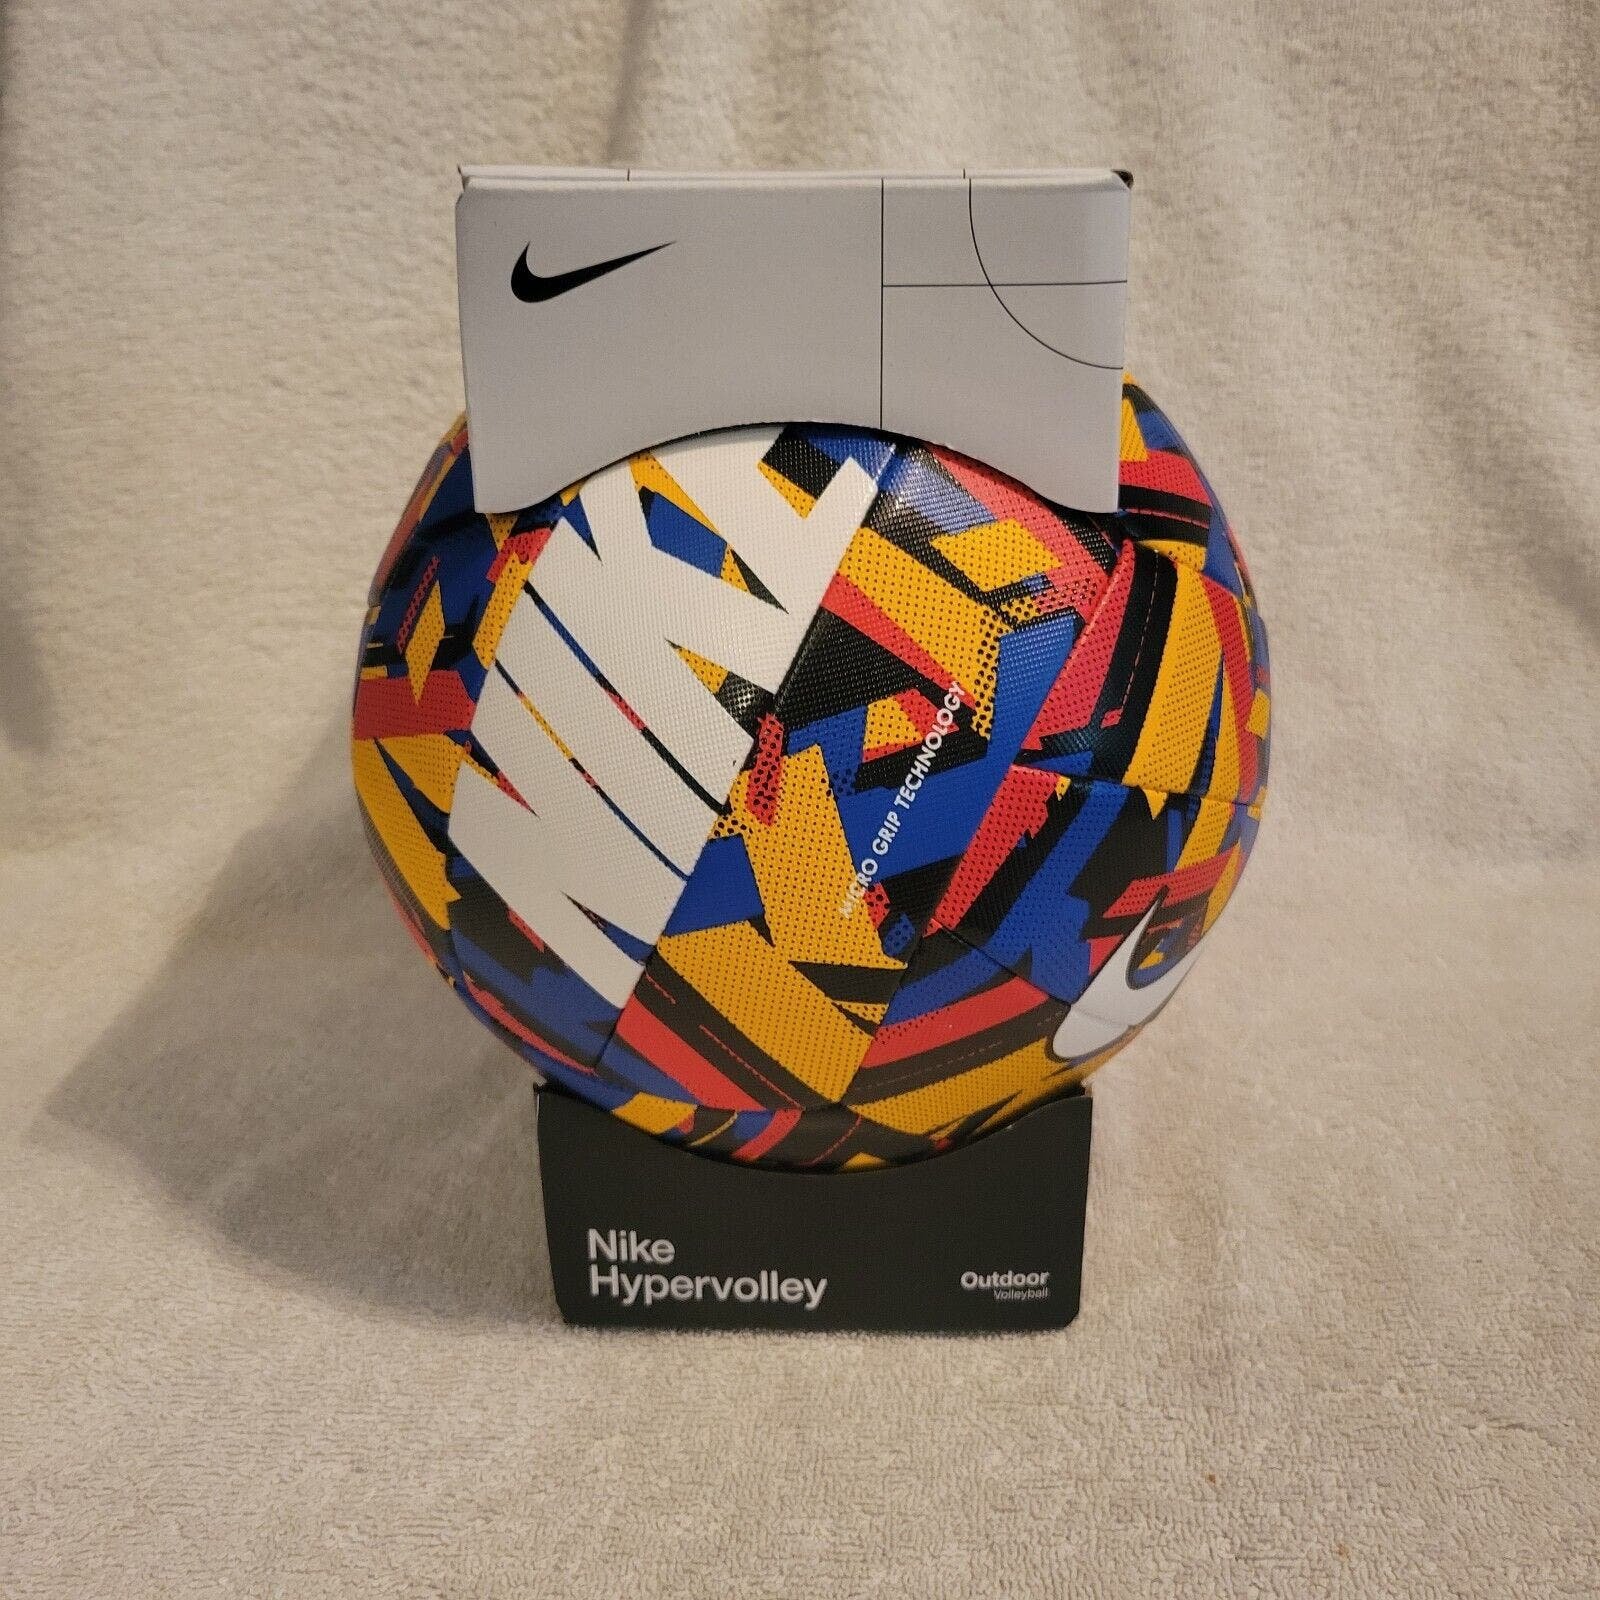 Nike Hypervolley 18 Panel Graphic Outdoor Volleyball NE